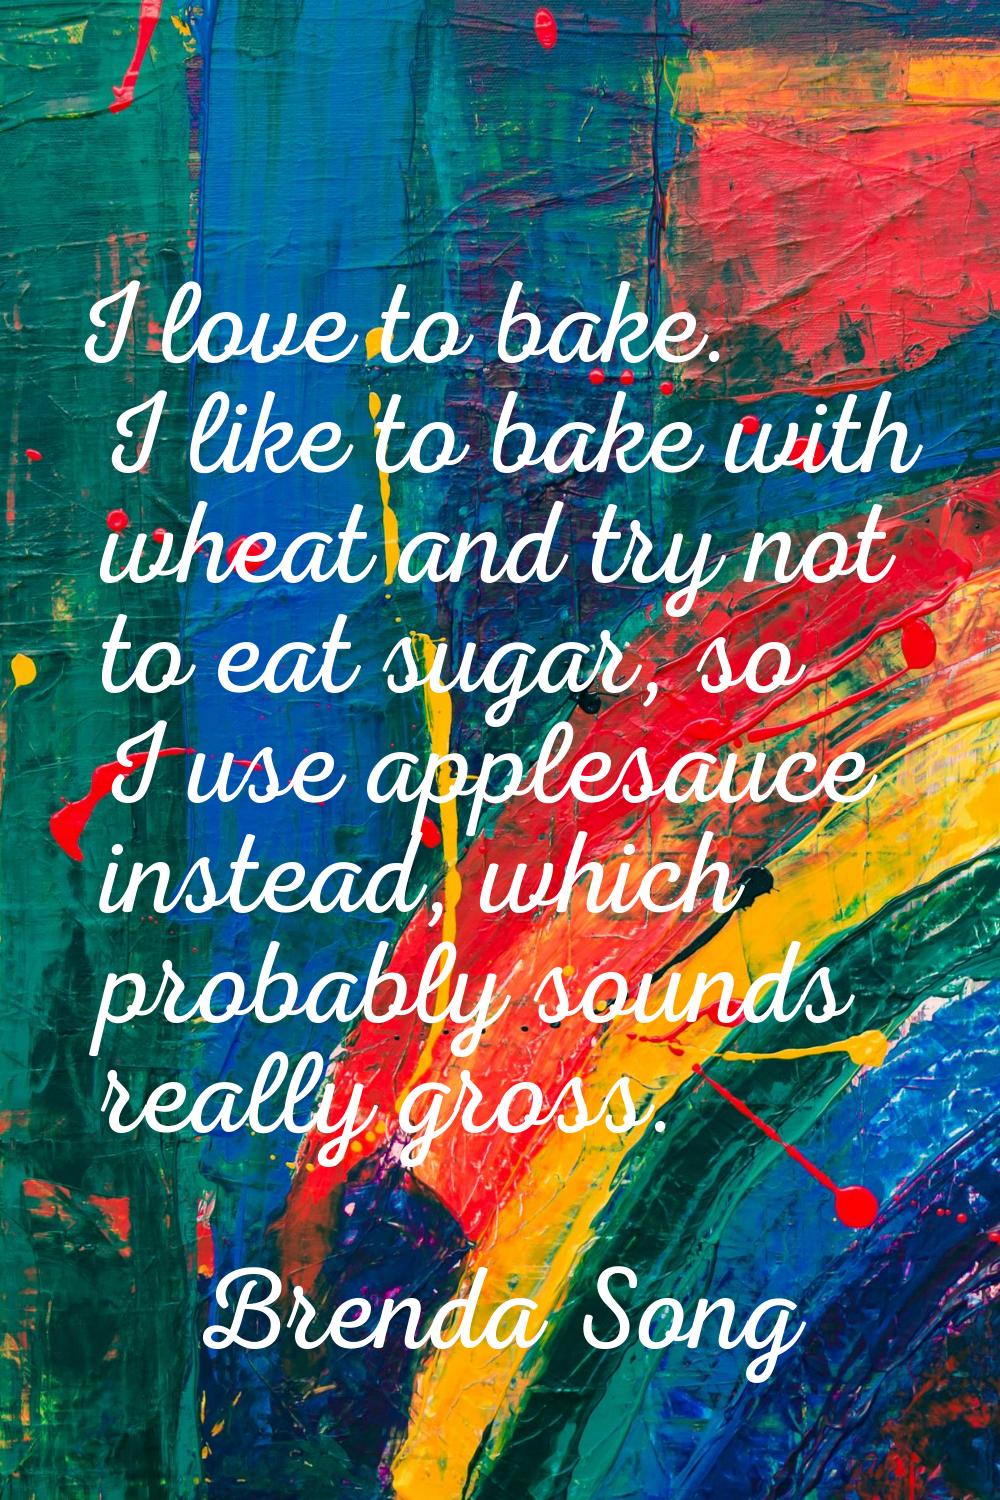 I love to bake. I like to bake with wheat and try not to eat sugar, so I use applesauce instead, wh